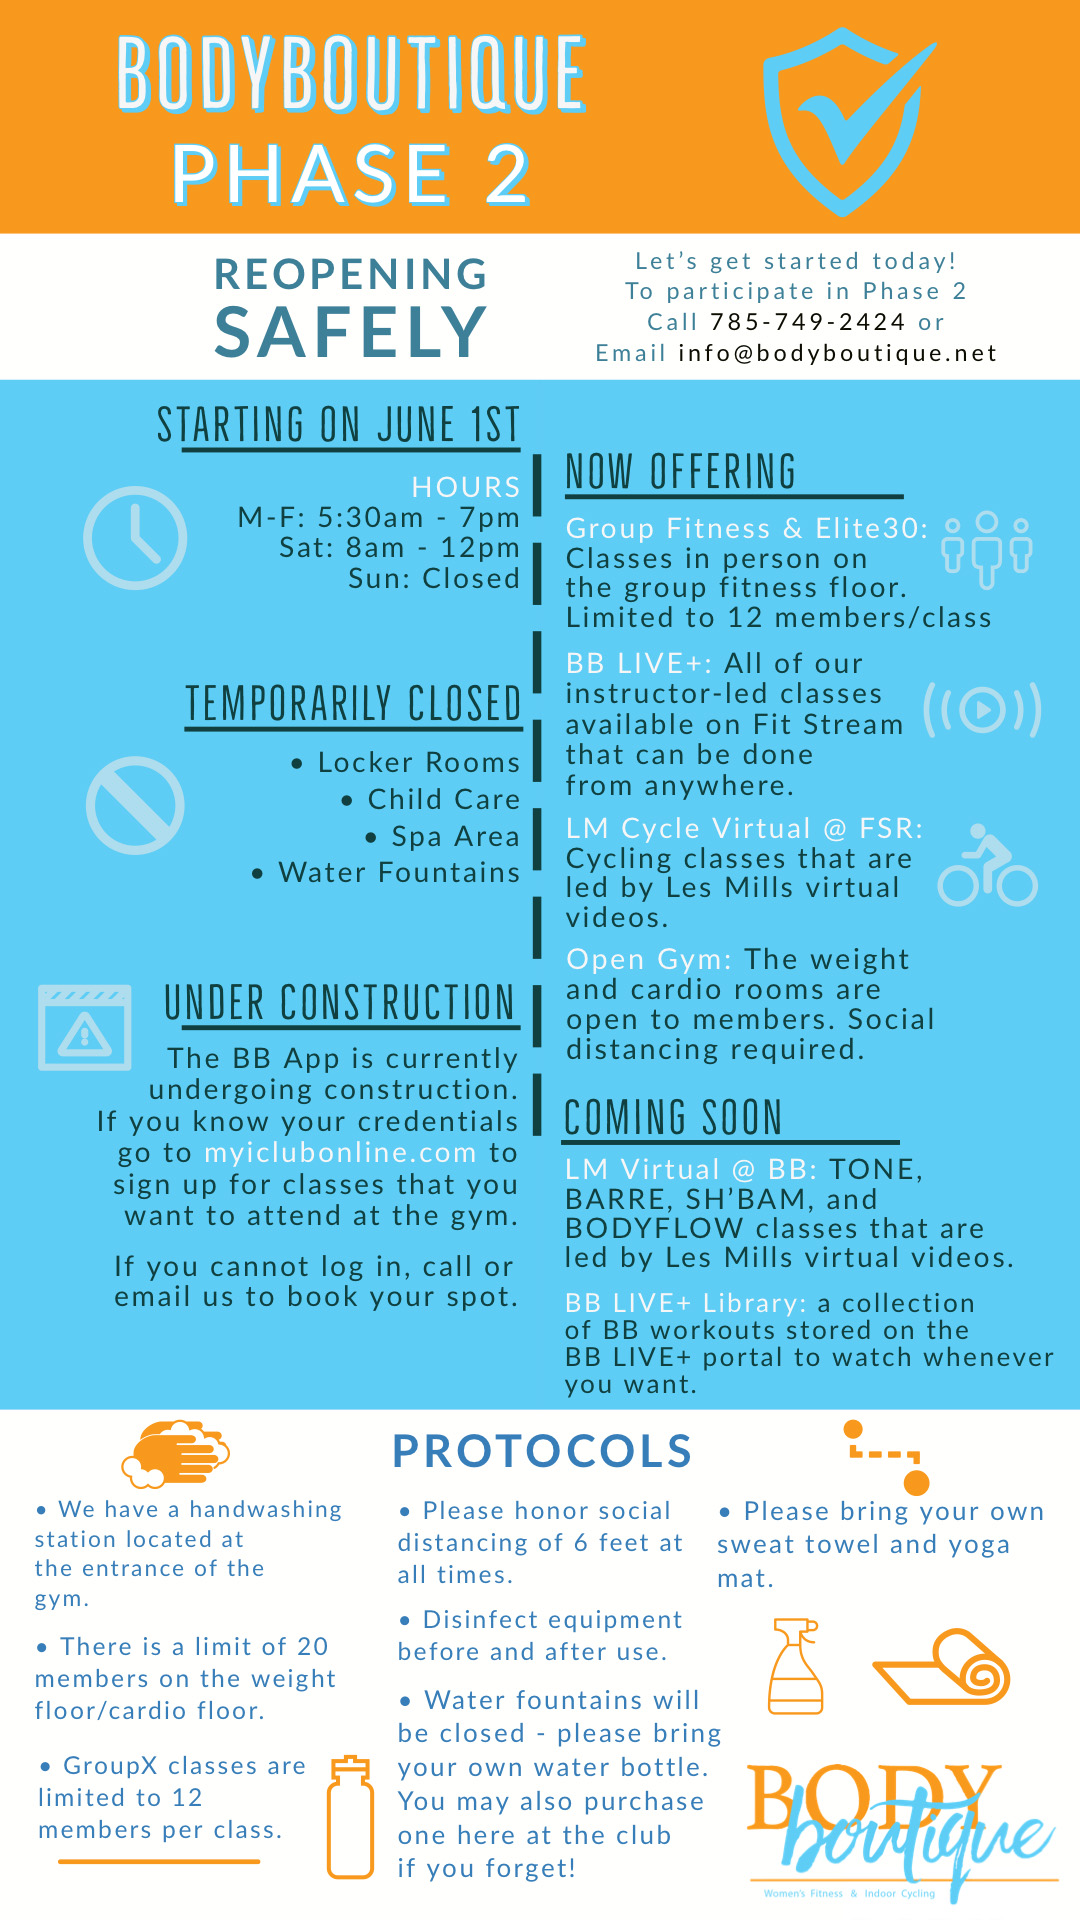 Body Boutique Phase 2 Protocols Infographic